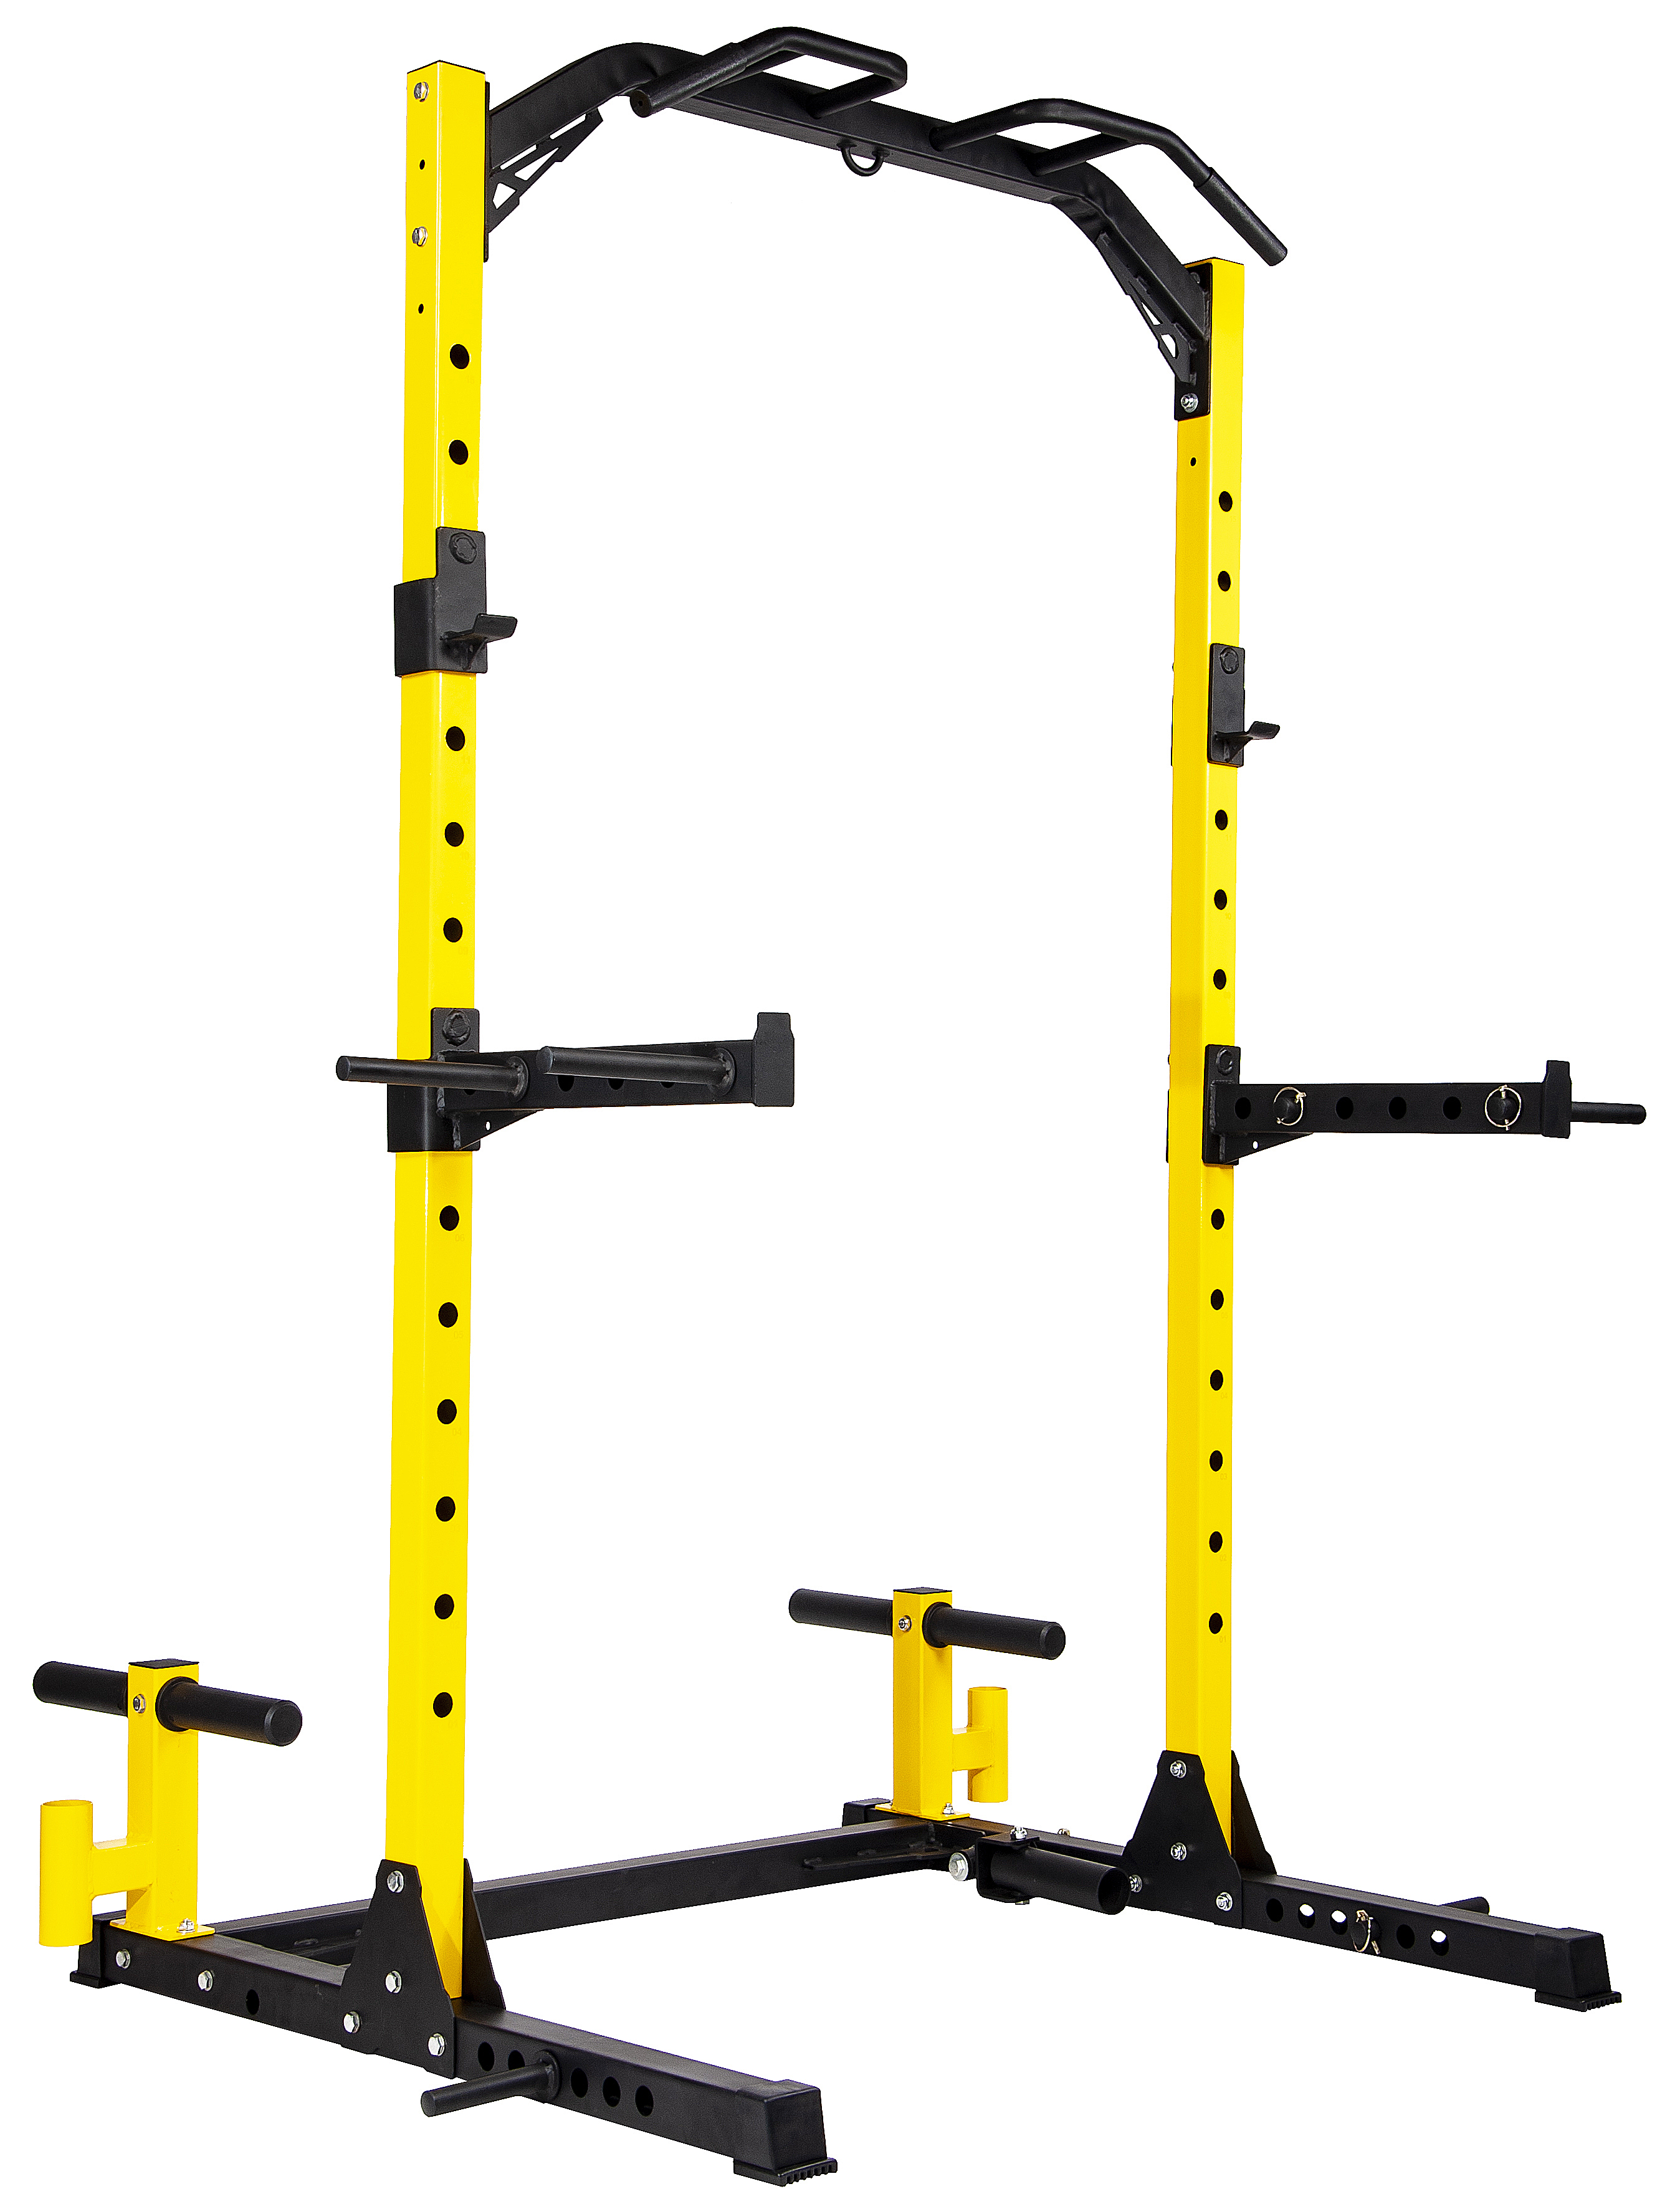 BalanceFrom 1000-Pound Capacity Multi-Function Adjustable Power Rack Squat Stand with Safety Spotter Arms, Dip Bars, Weight Plate Holders, Barbell Holders and Landmine Attachment - image 1 of 8